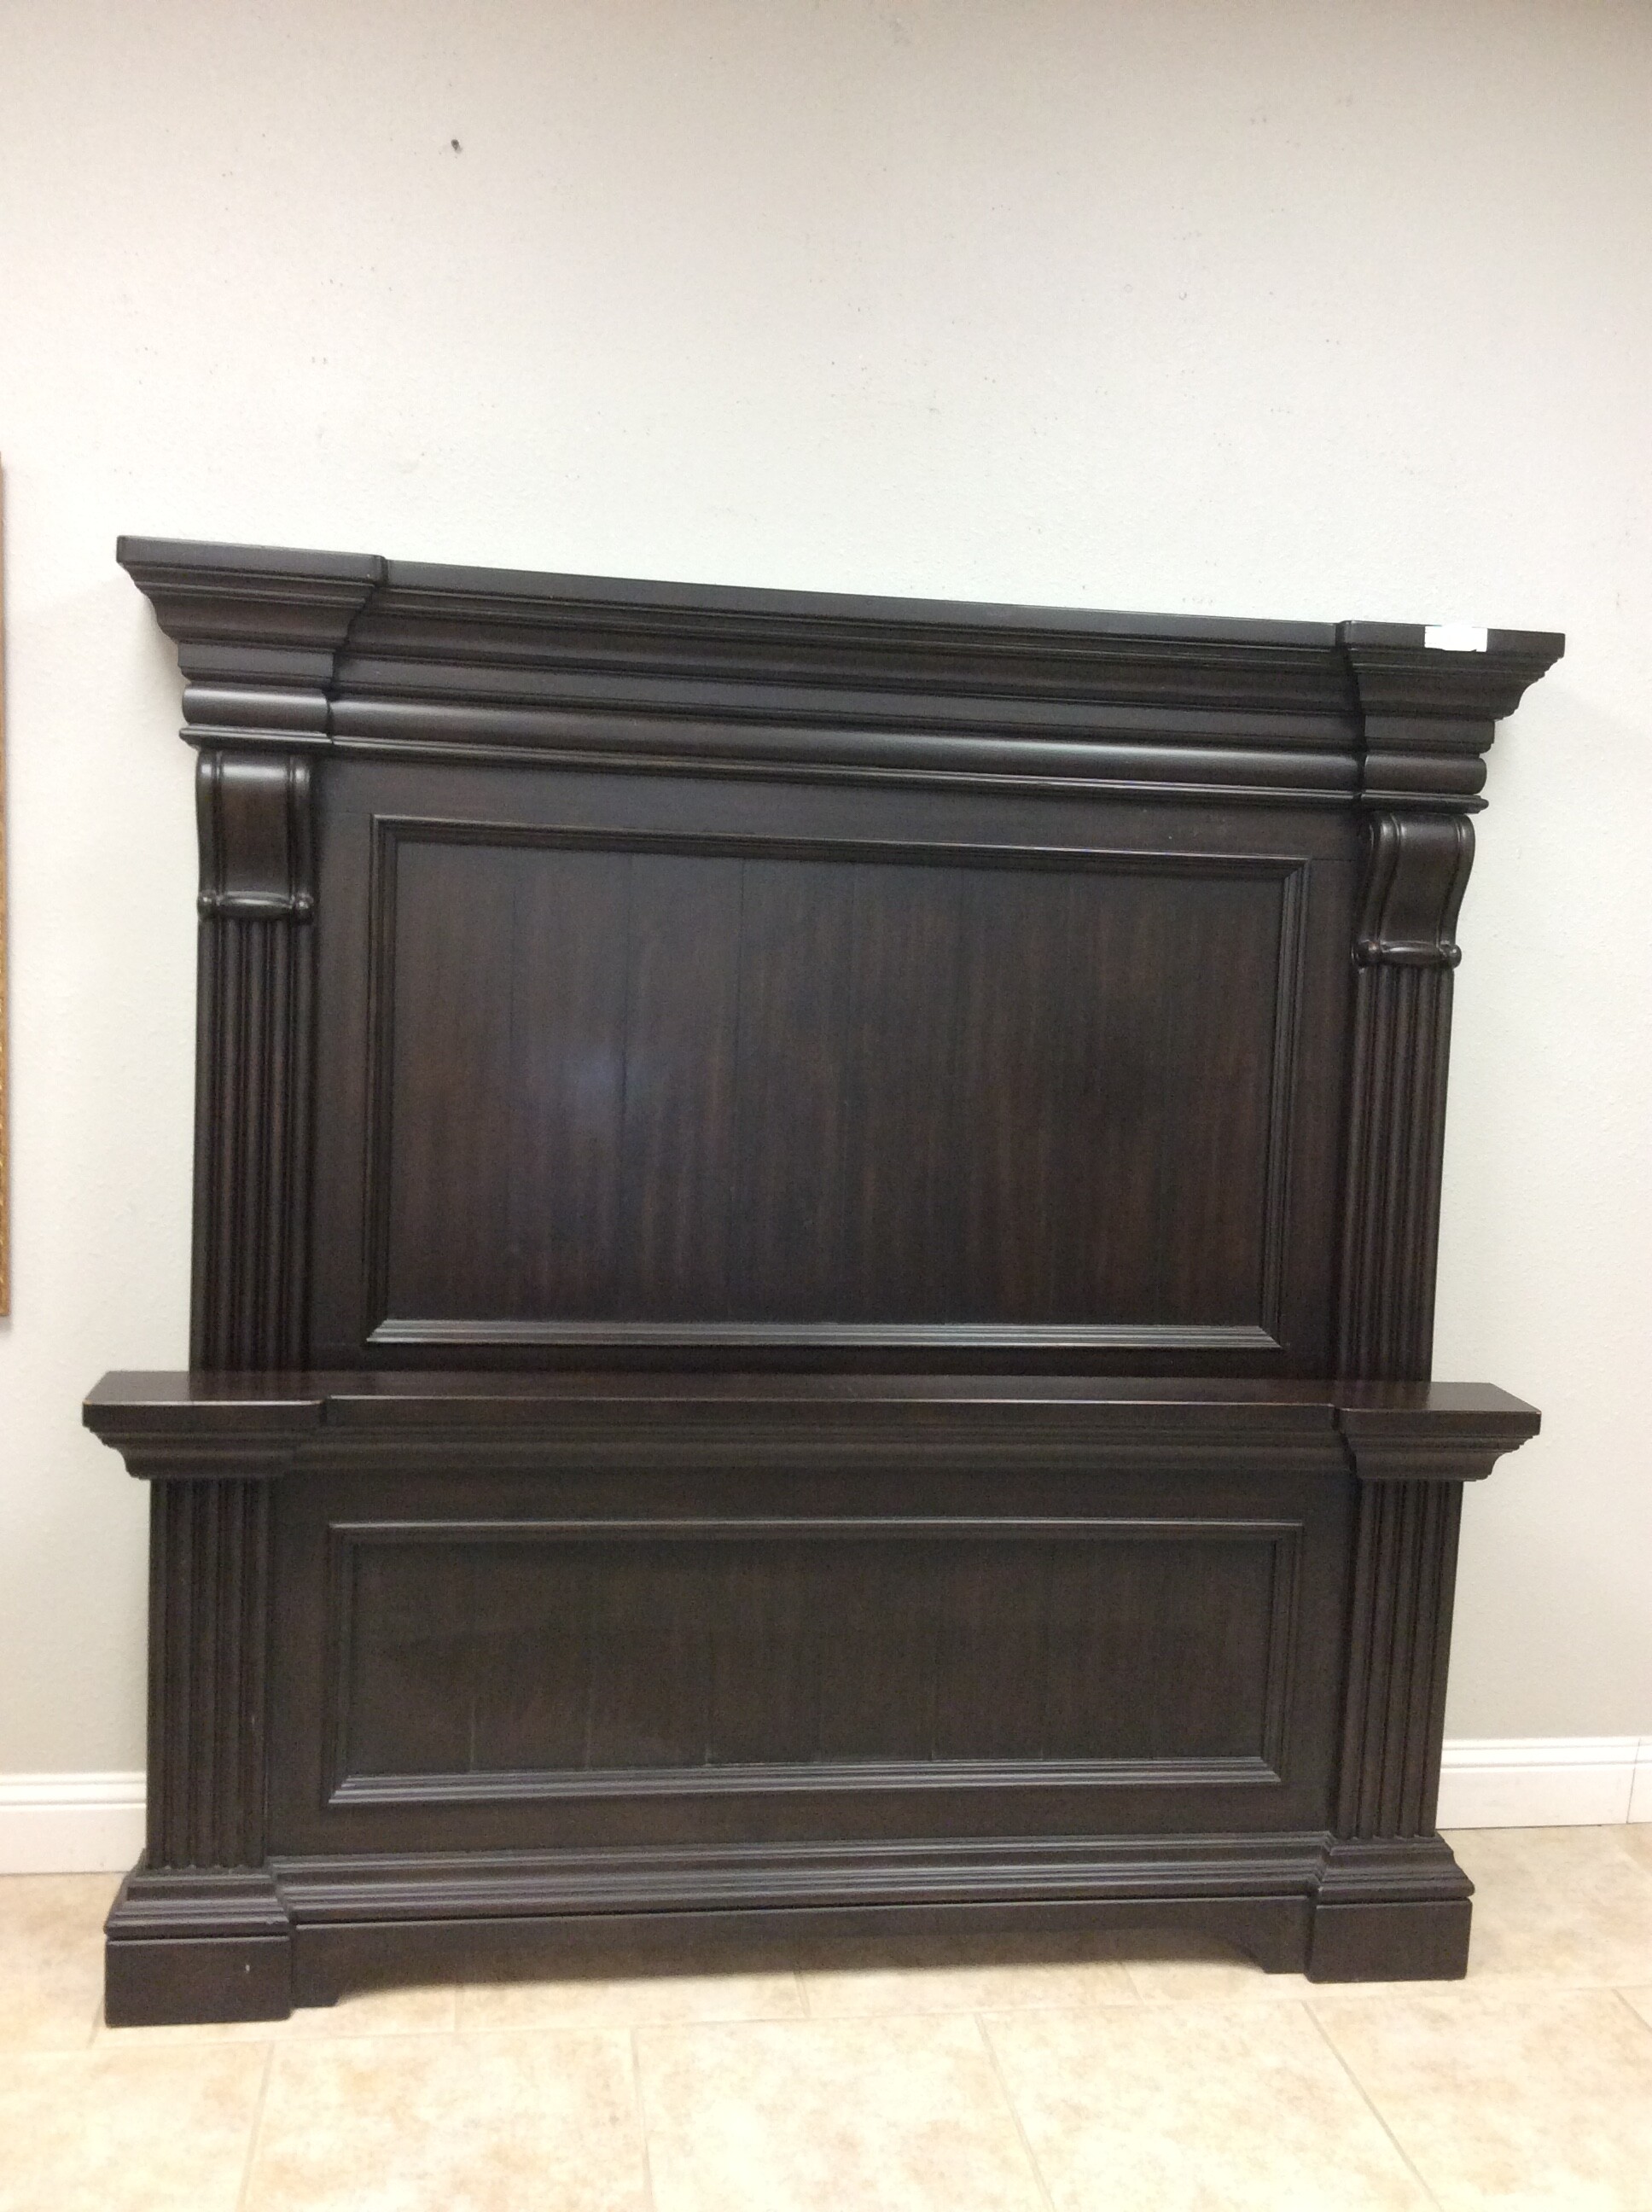 This is a Home Meridian Queen Head/Foot Borad. The Dark wood finish and beautiful detailed trim work makes this bed a wonderful piece for your bedroom.